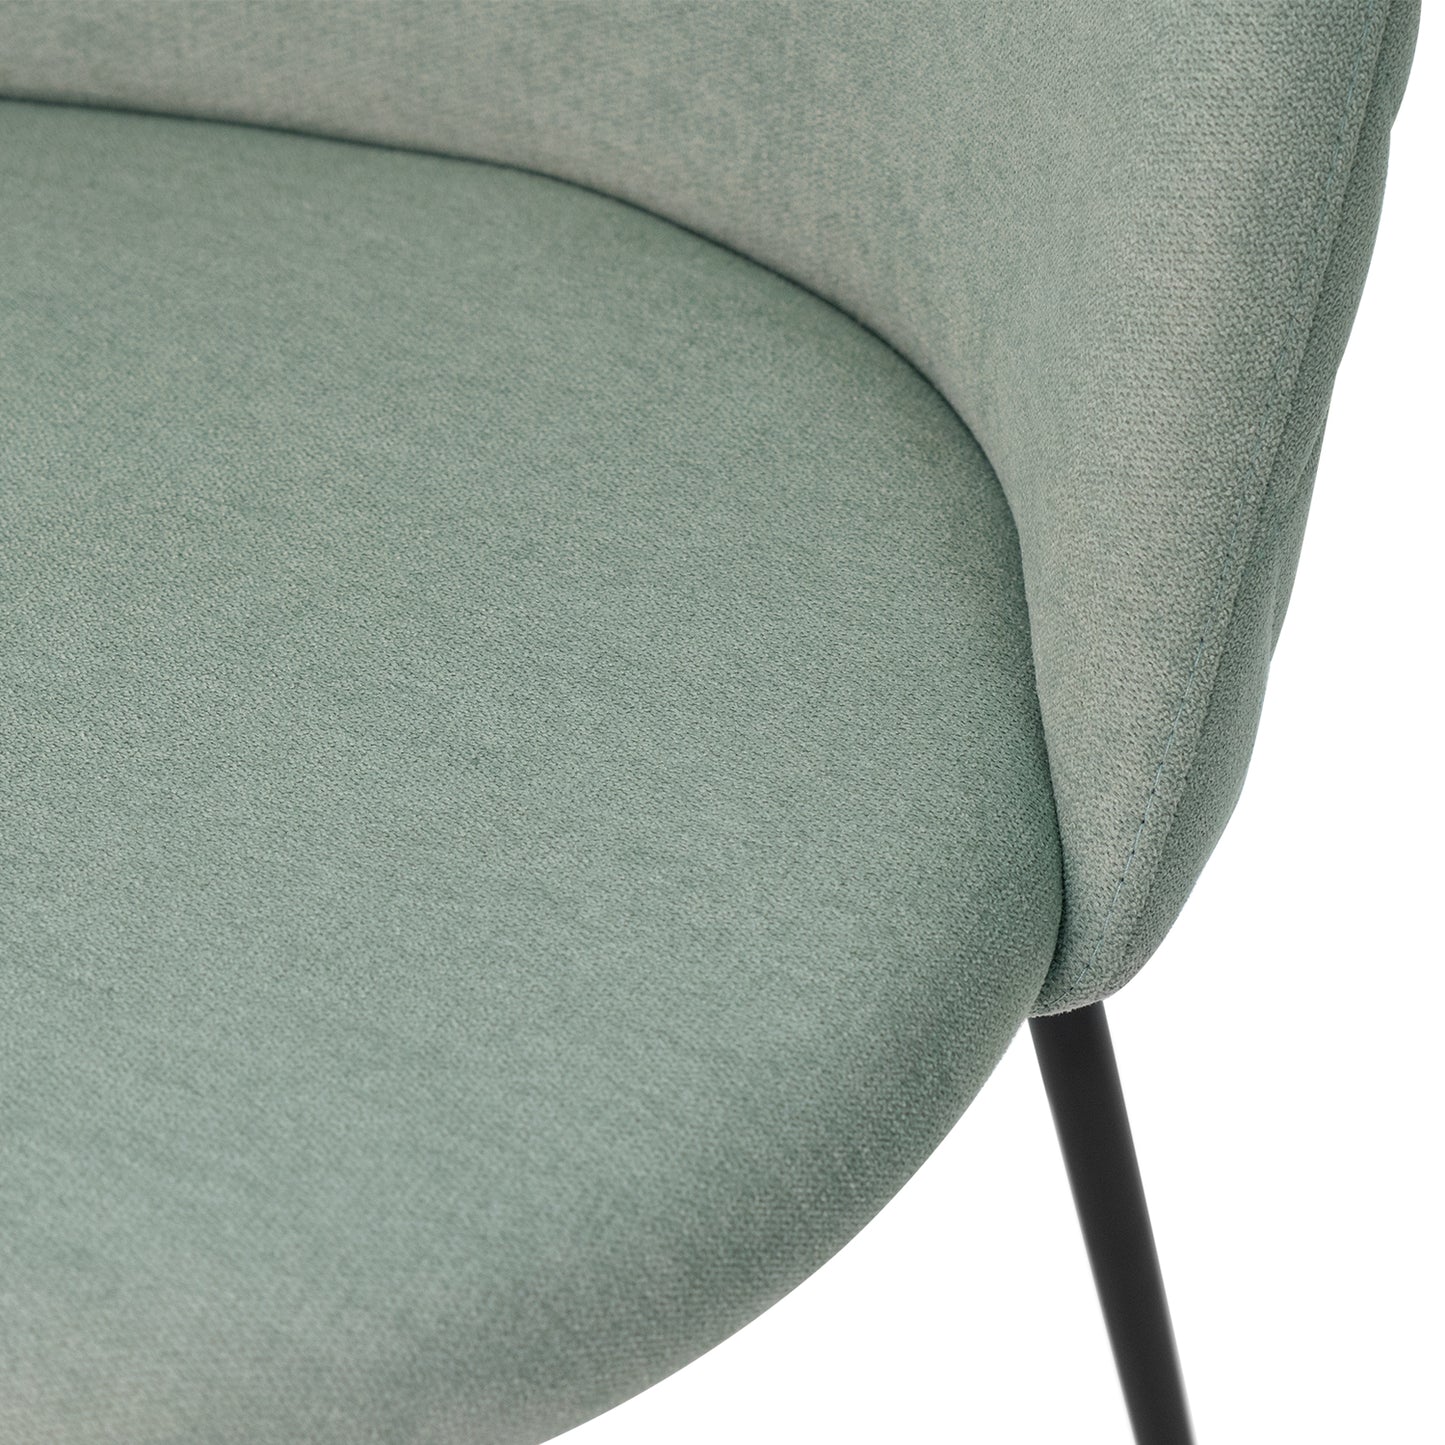 Laila dining chair